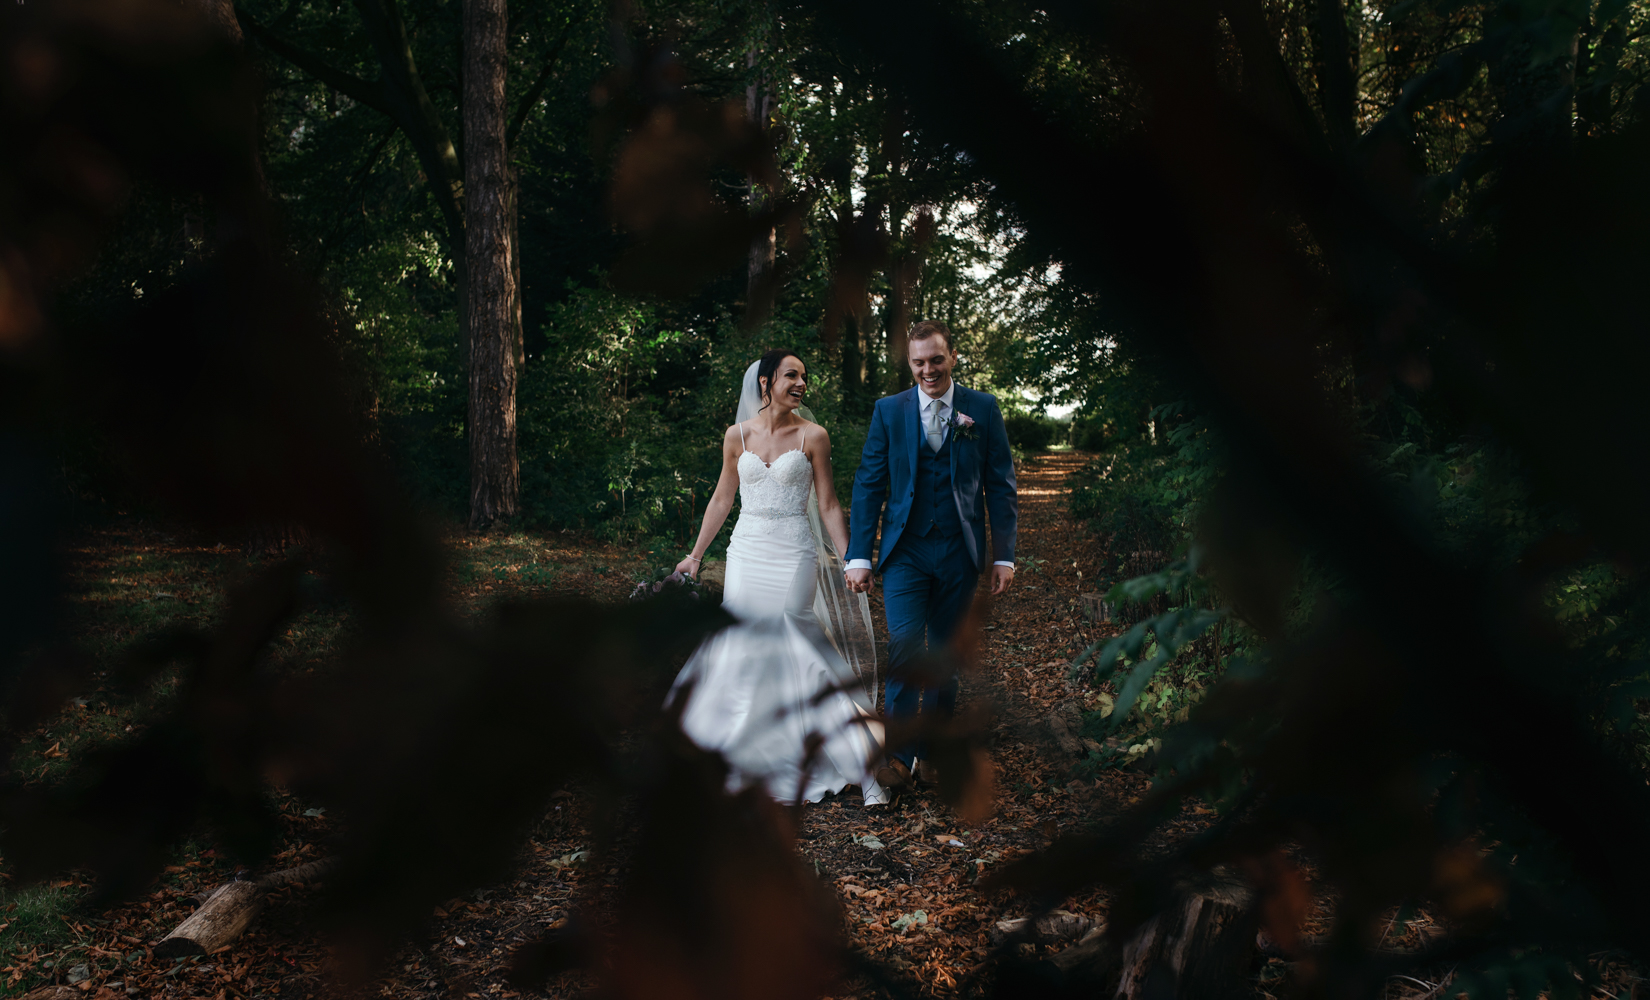 The bride and groom walking in the woods at Inglewood Manor